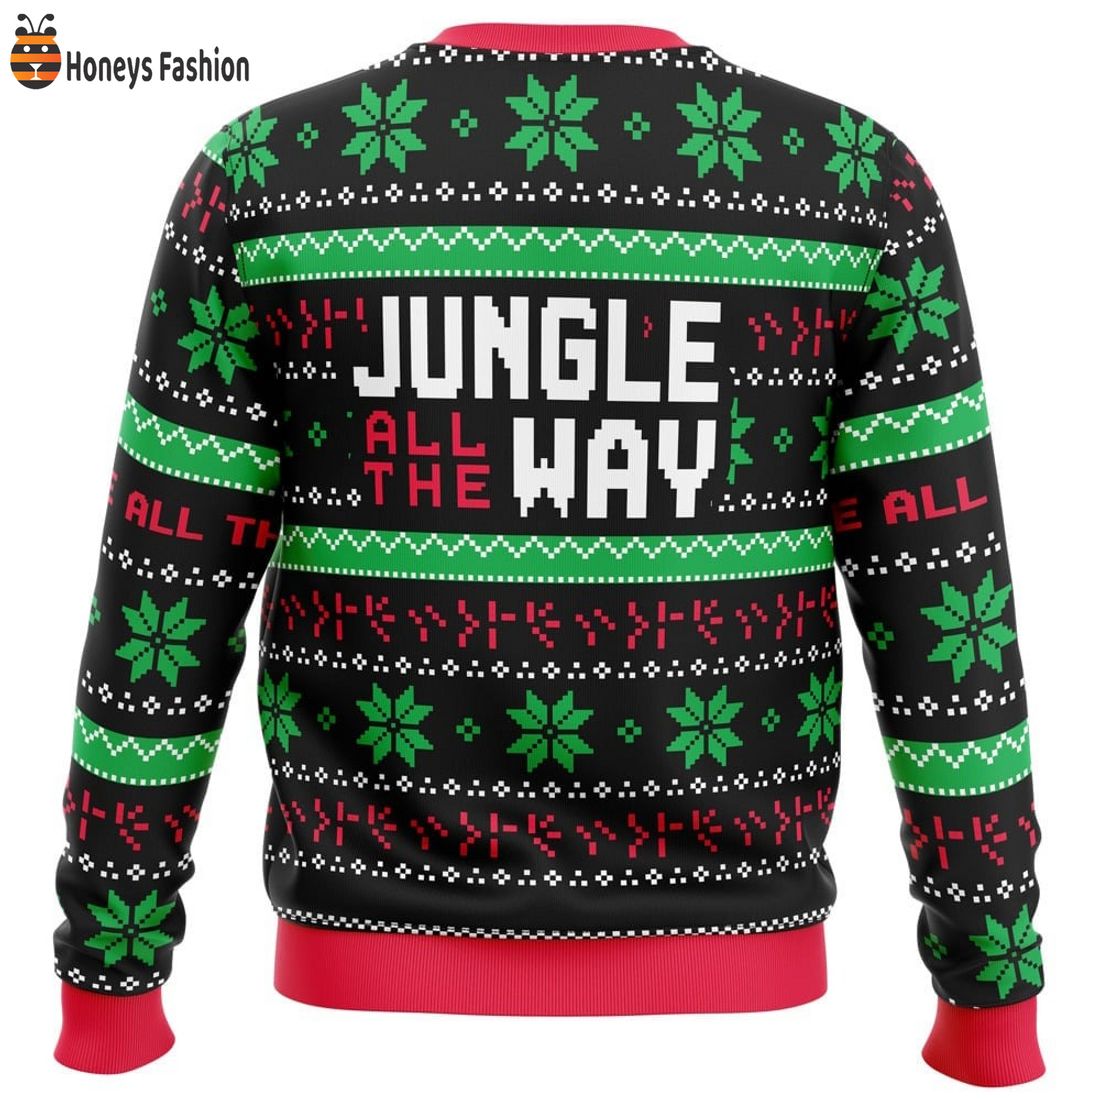 Arnold Schwarzenegger Jungle All The Way Ugly Christmas Sweater